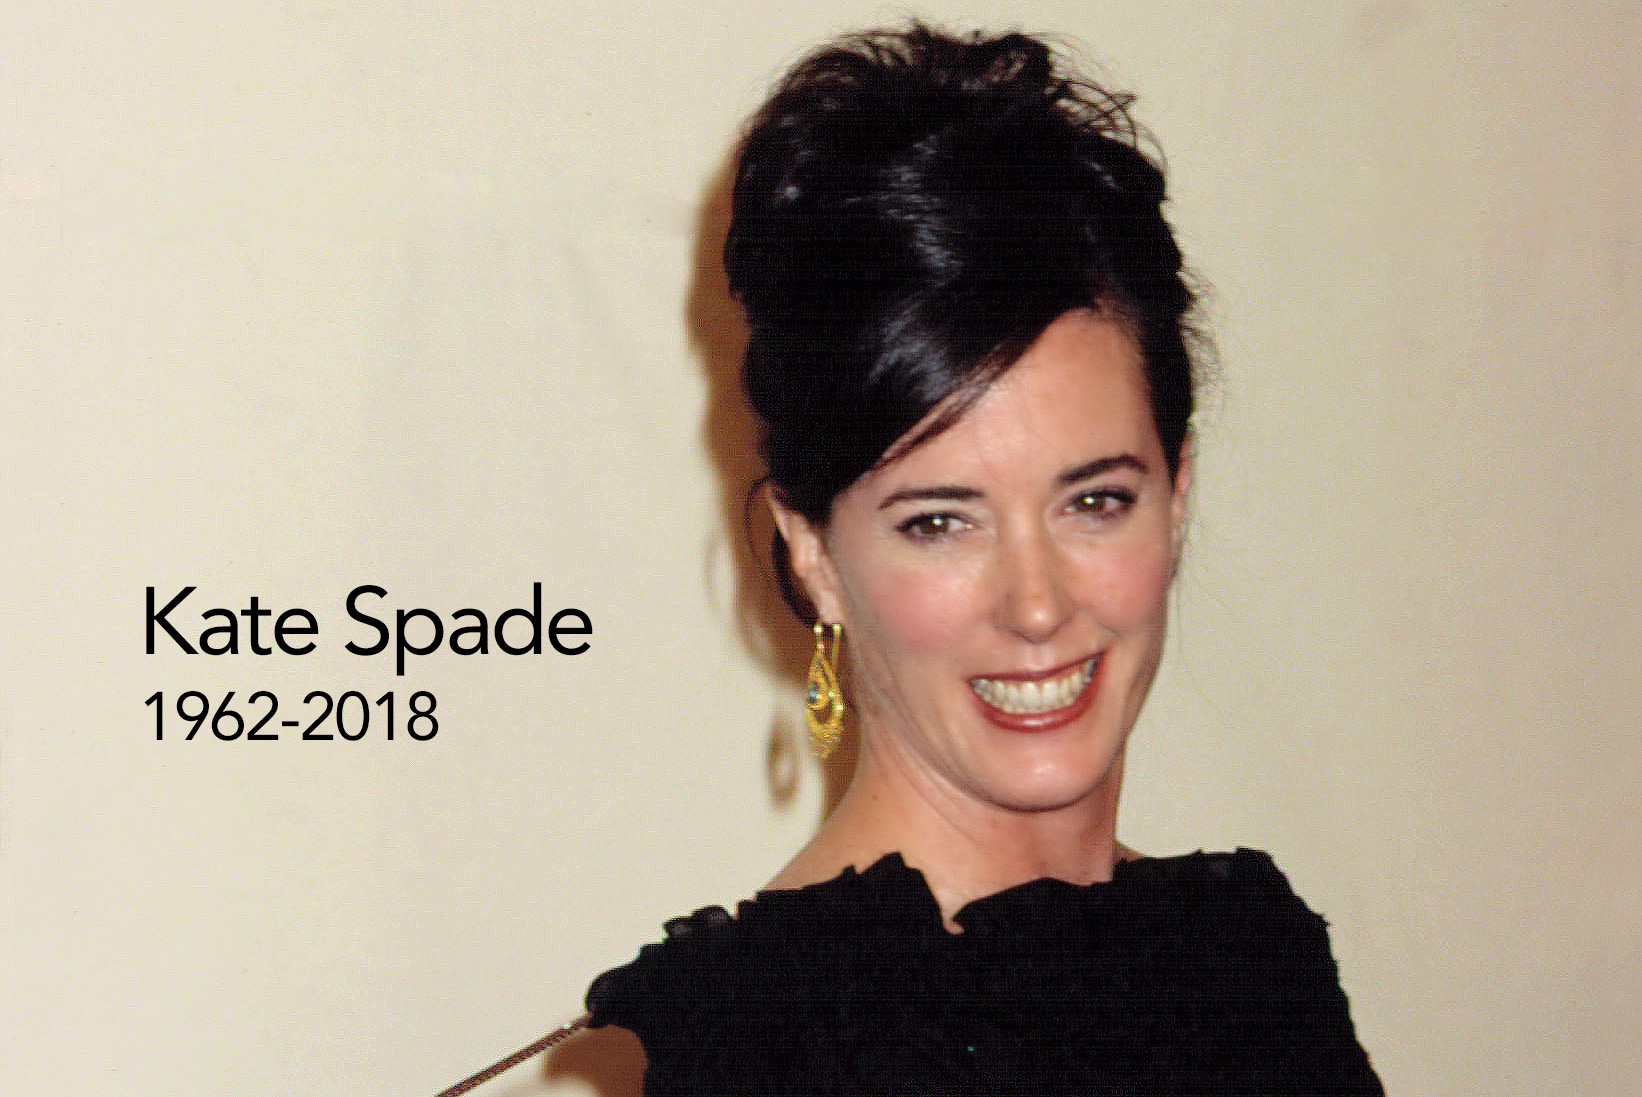 Total 48+ imagen did kate spade really commit suicide